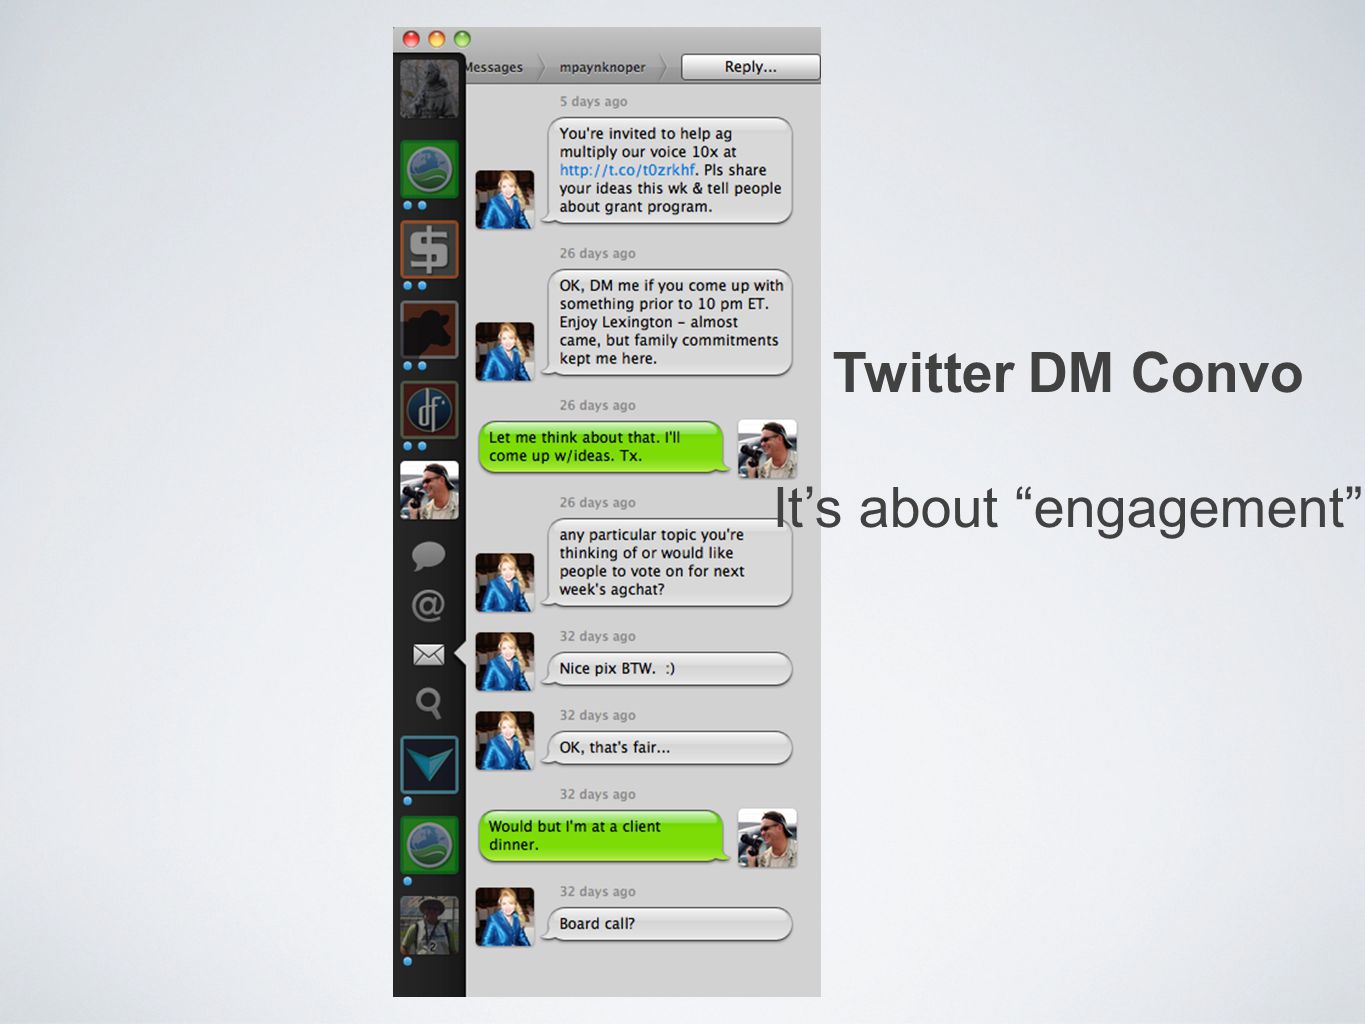 Twitter DM Convo It’s about engagement